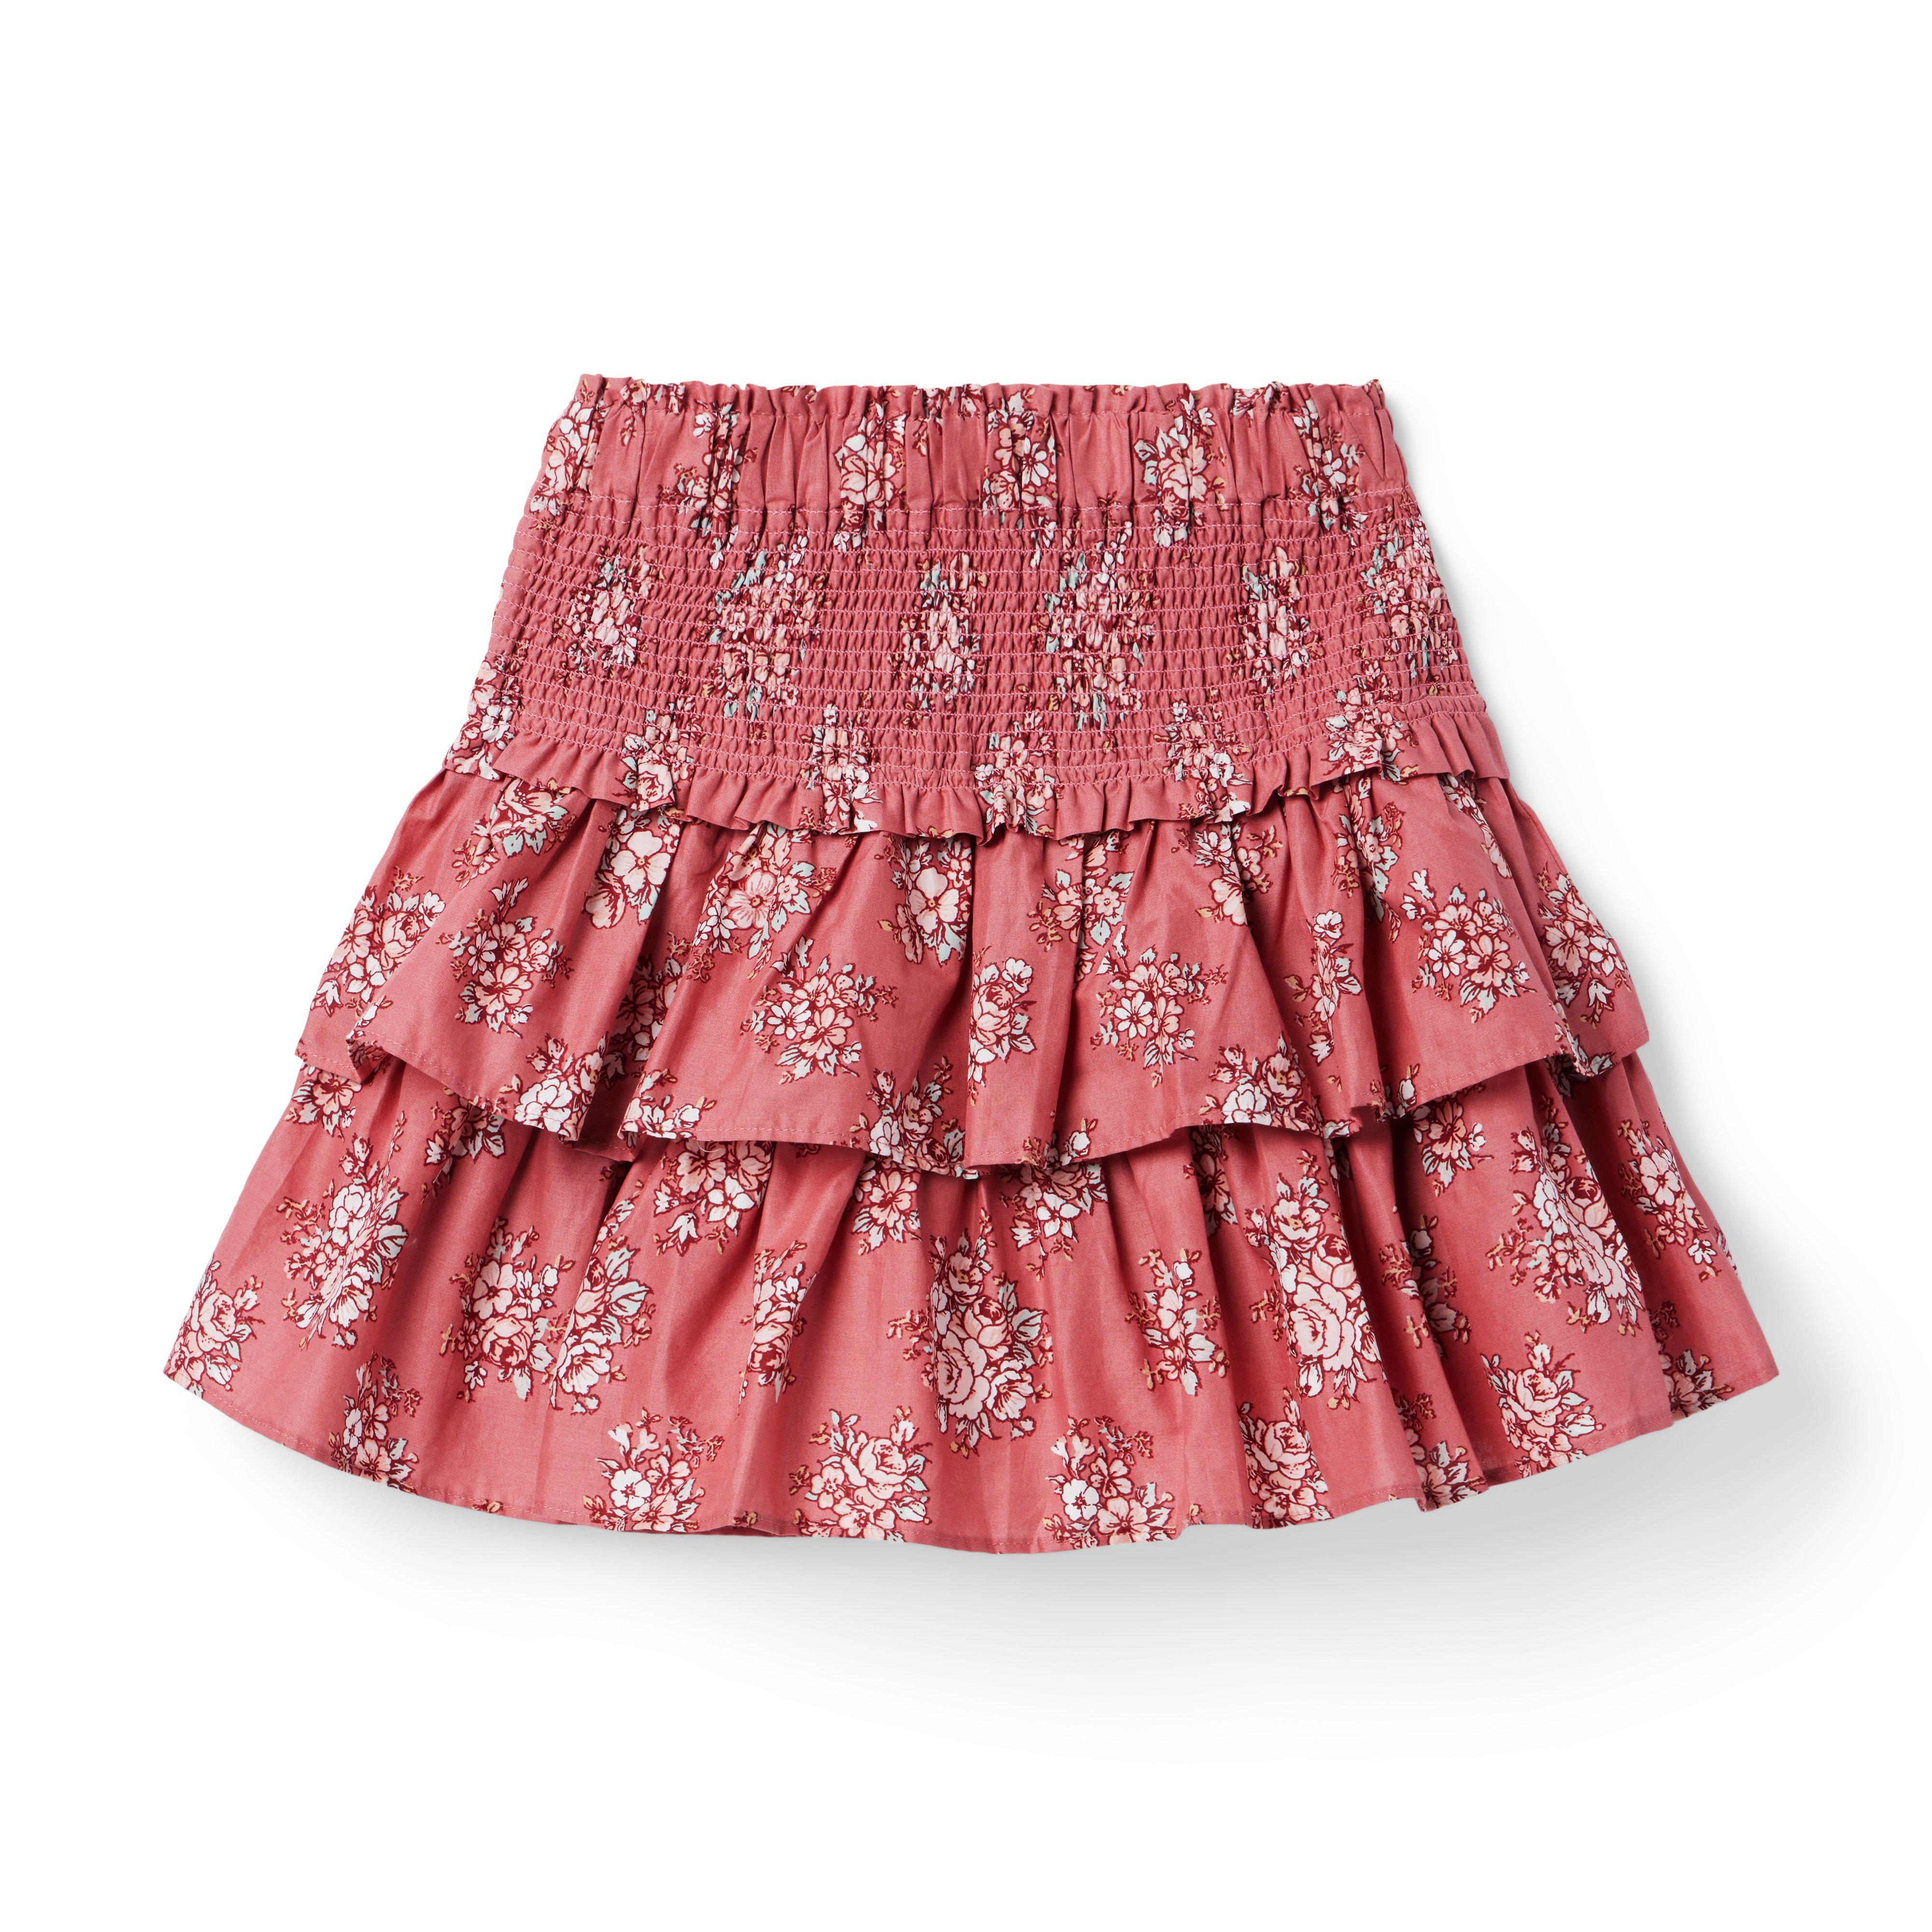 Tween Mauvewood Floral The Hailey Smocked Skirt by Janie and Jack